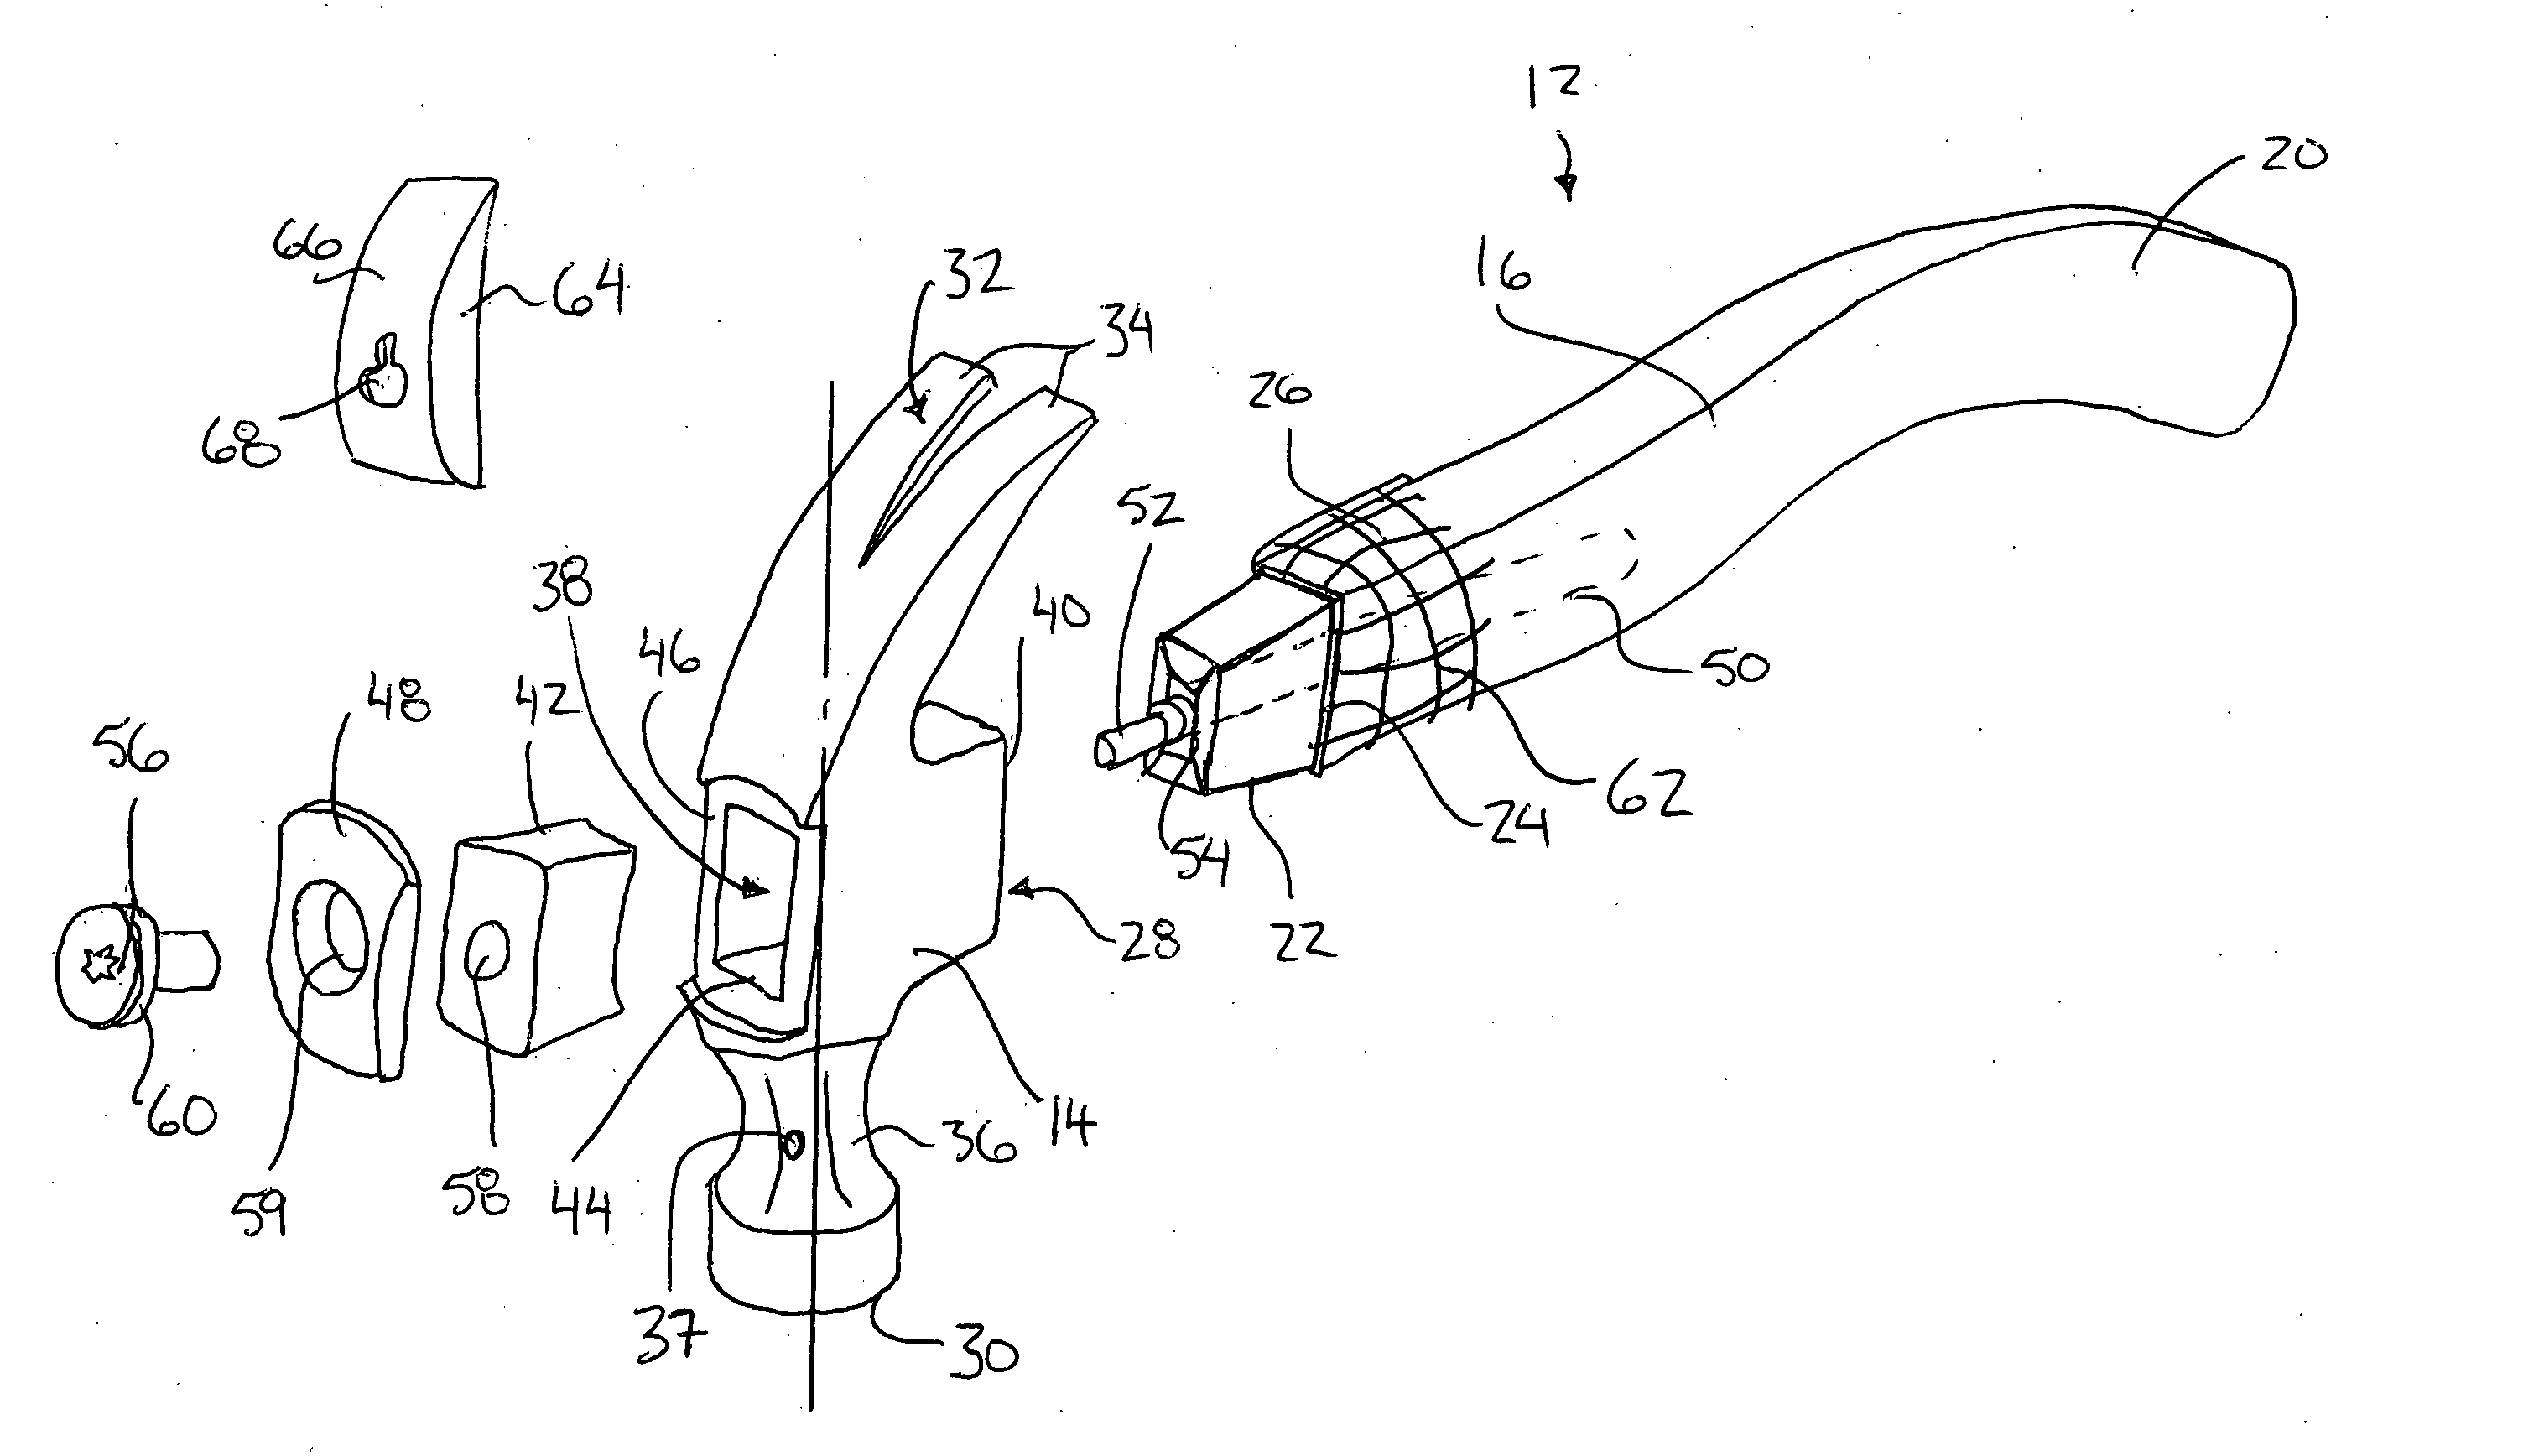 Ergonomic tool handle and related hammer system